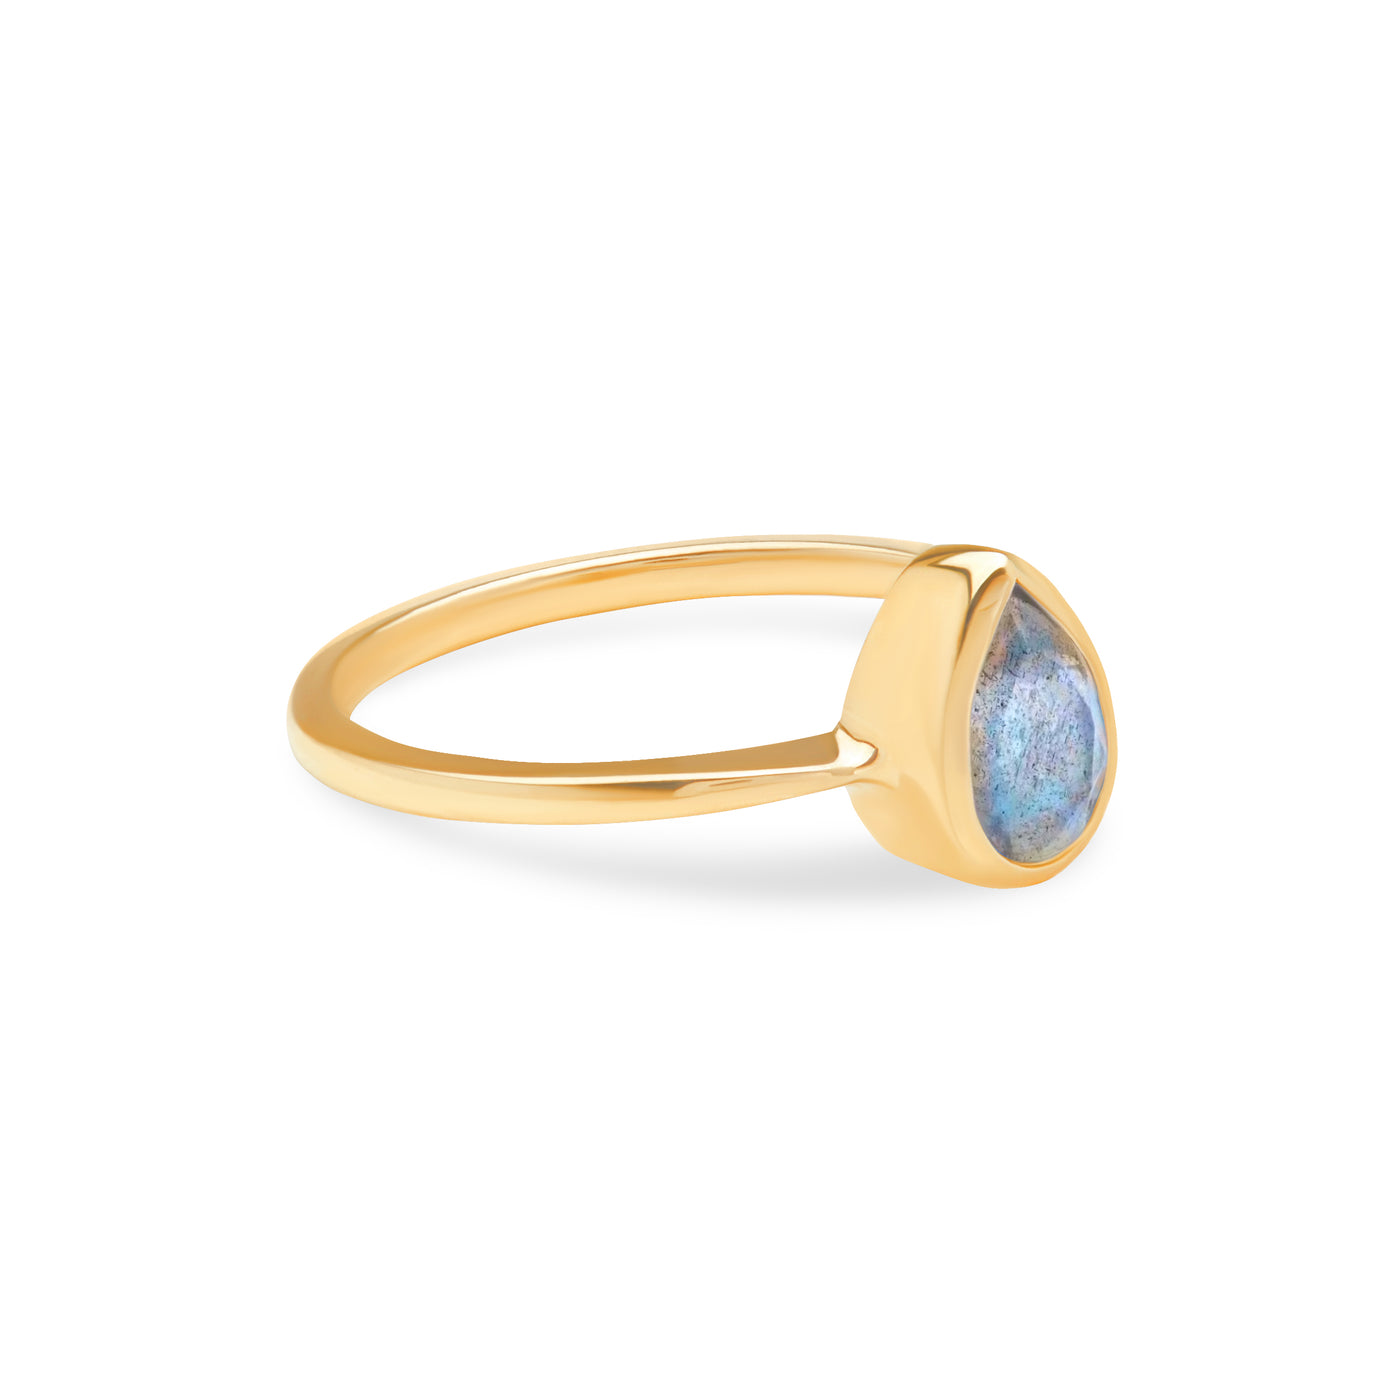 14 Karat Yellow Gold Ring with Pear Shaped Labradorite Stone Against White Background Turned for Side View